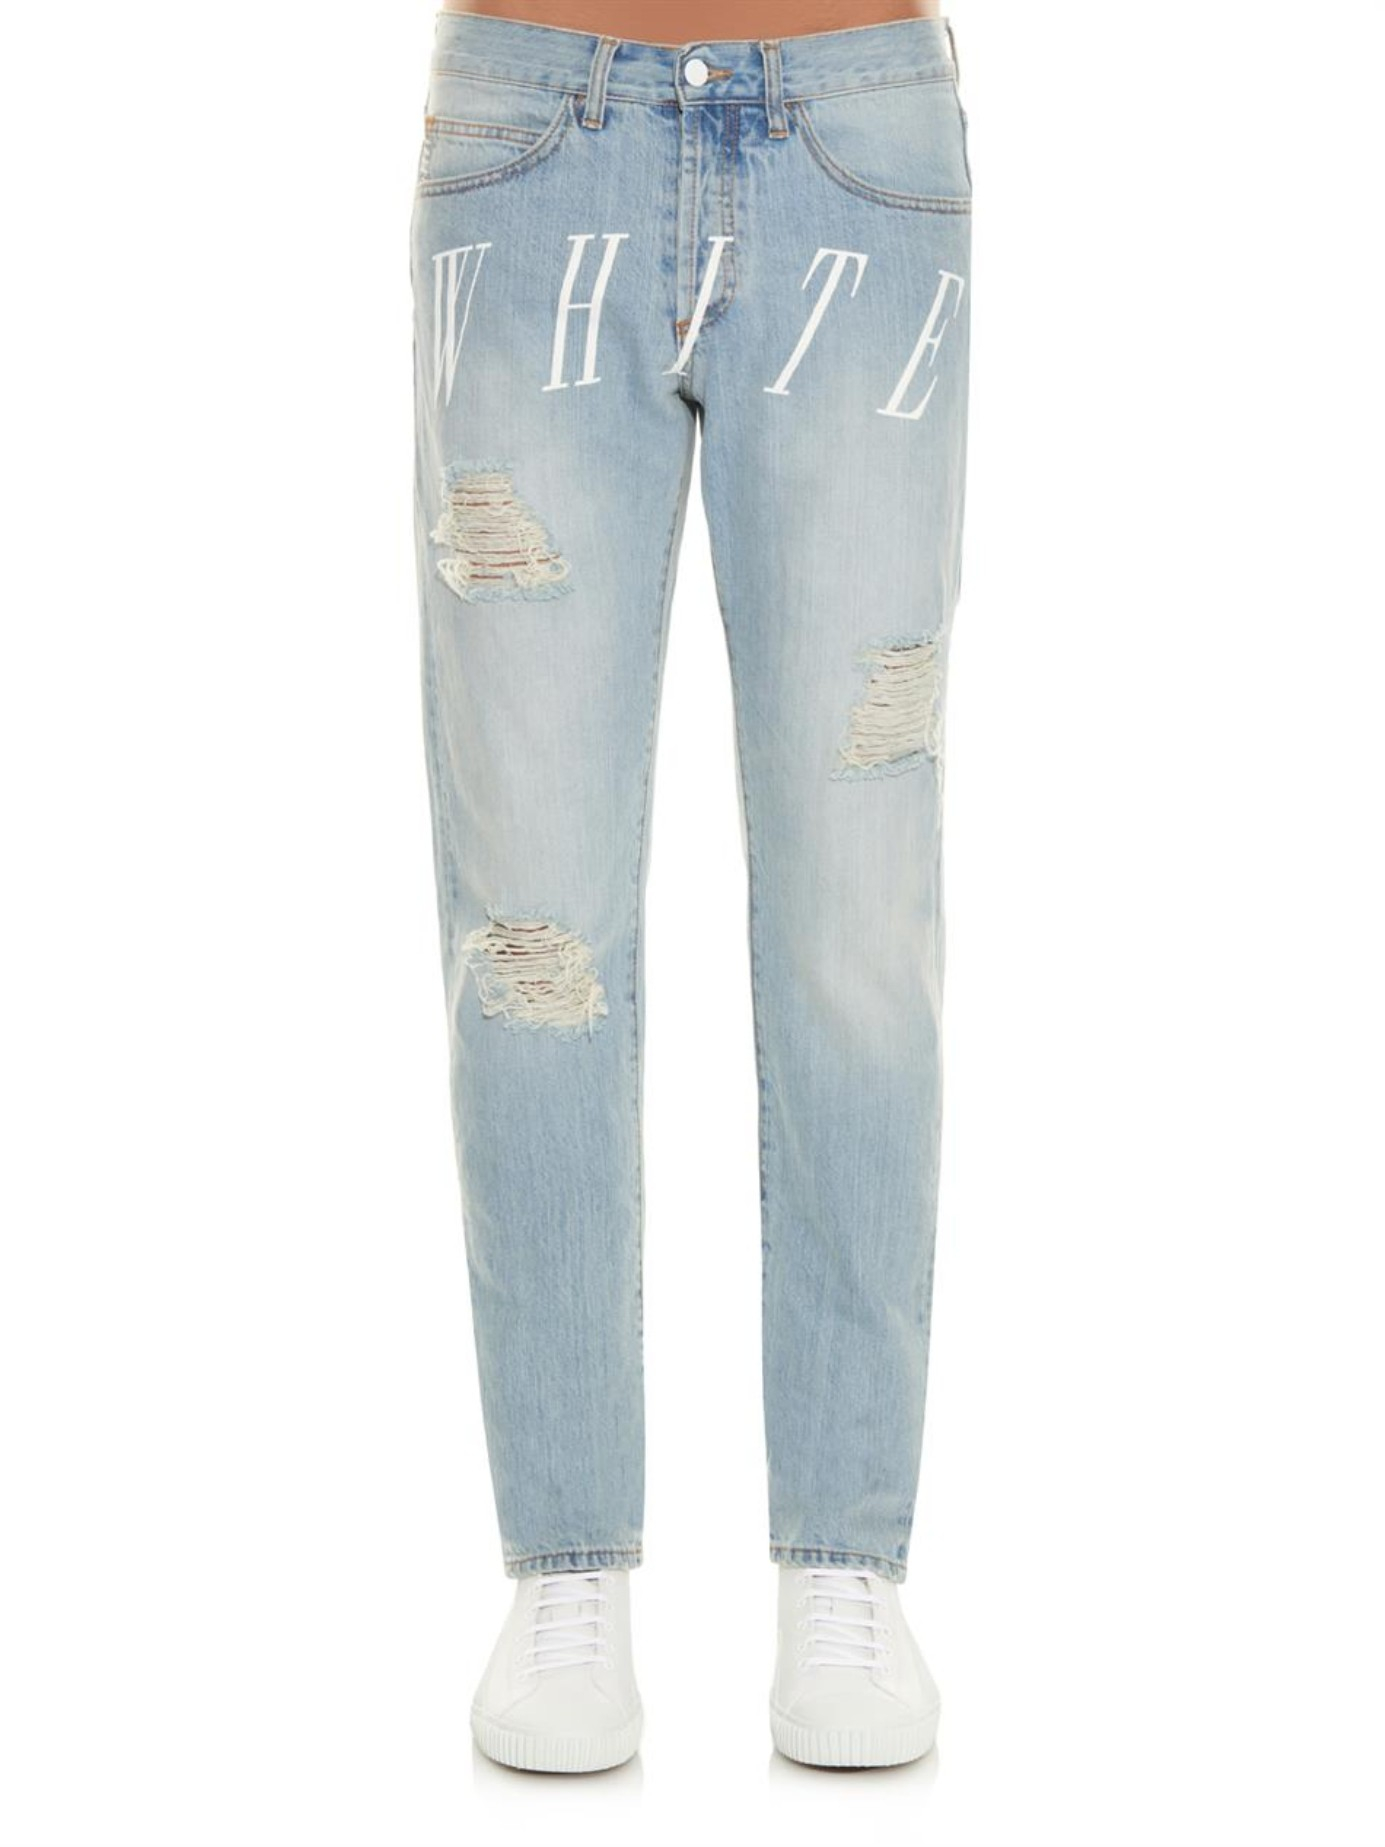 off white distressed jeans